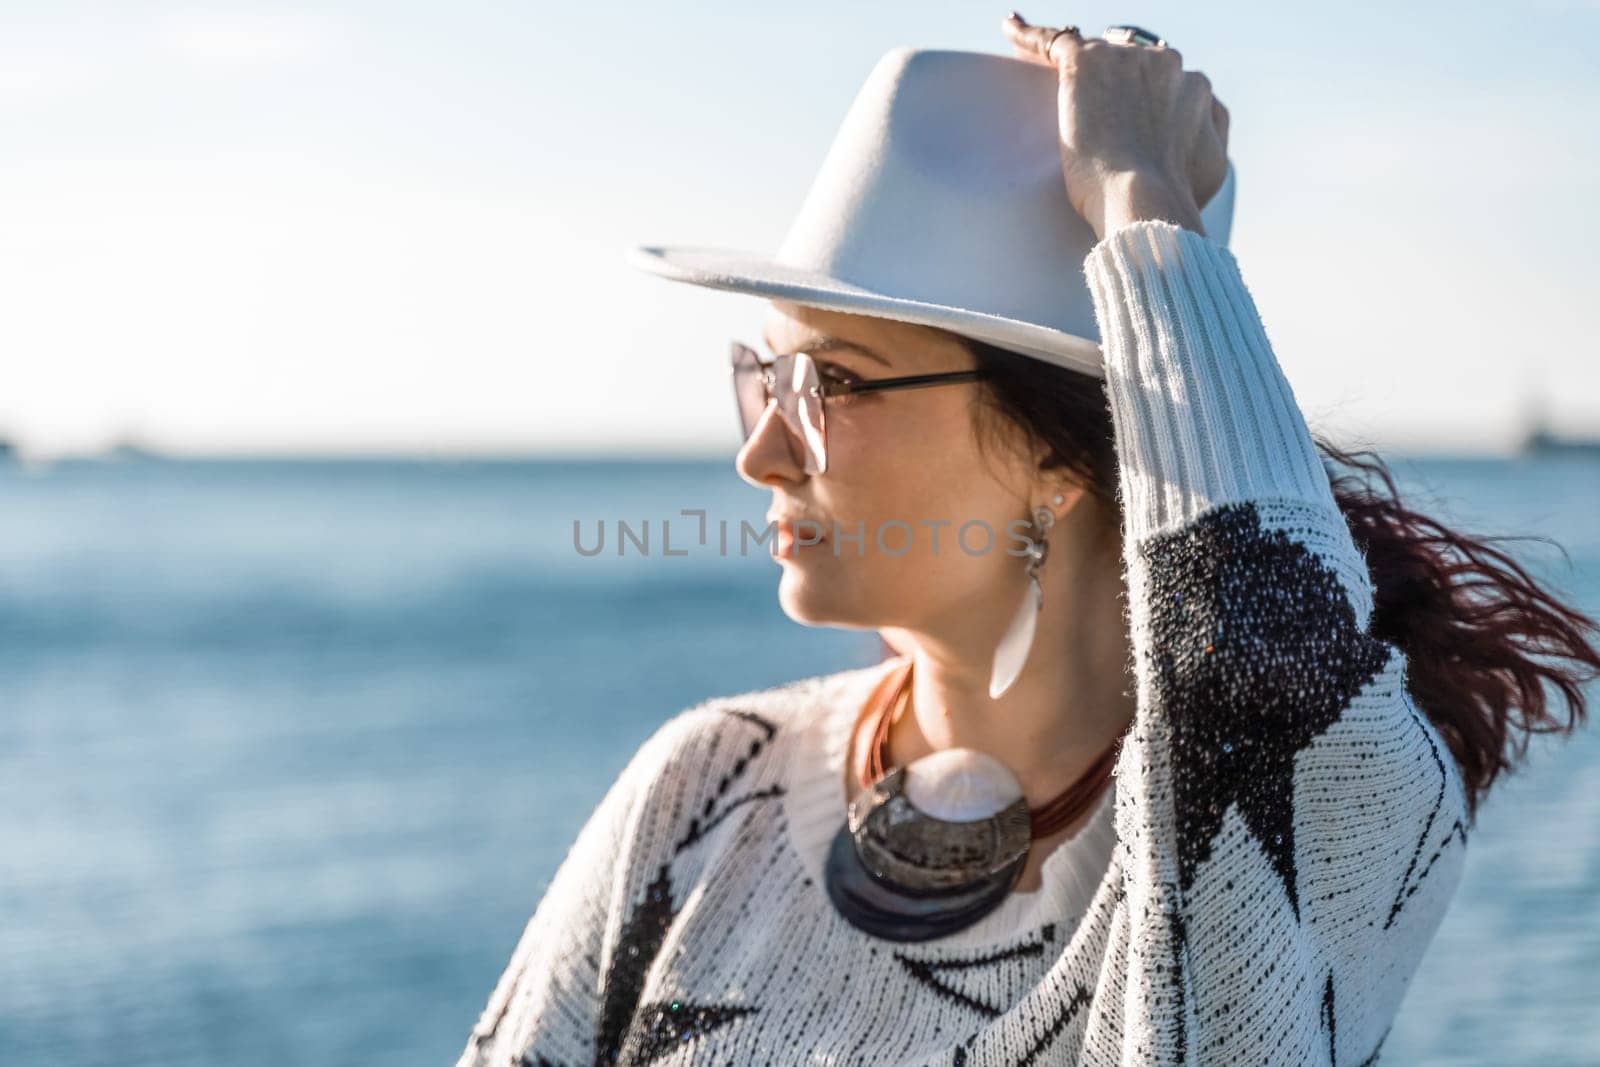 Portrait of a curly haired woman in a white hat and glasses on t by Matiunina